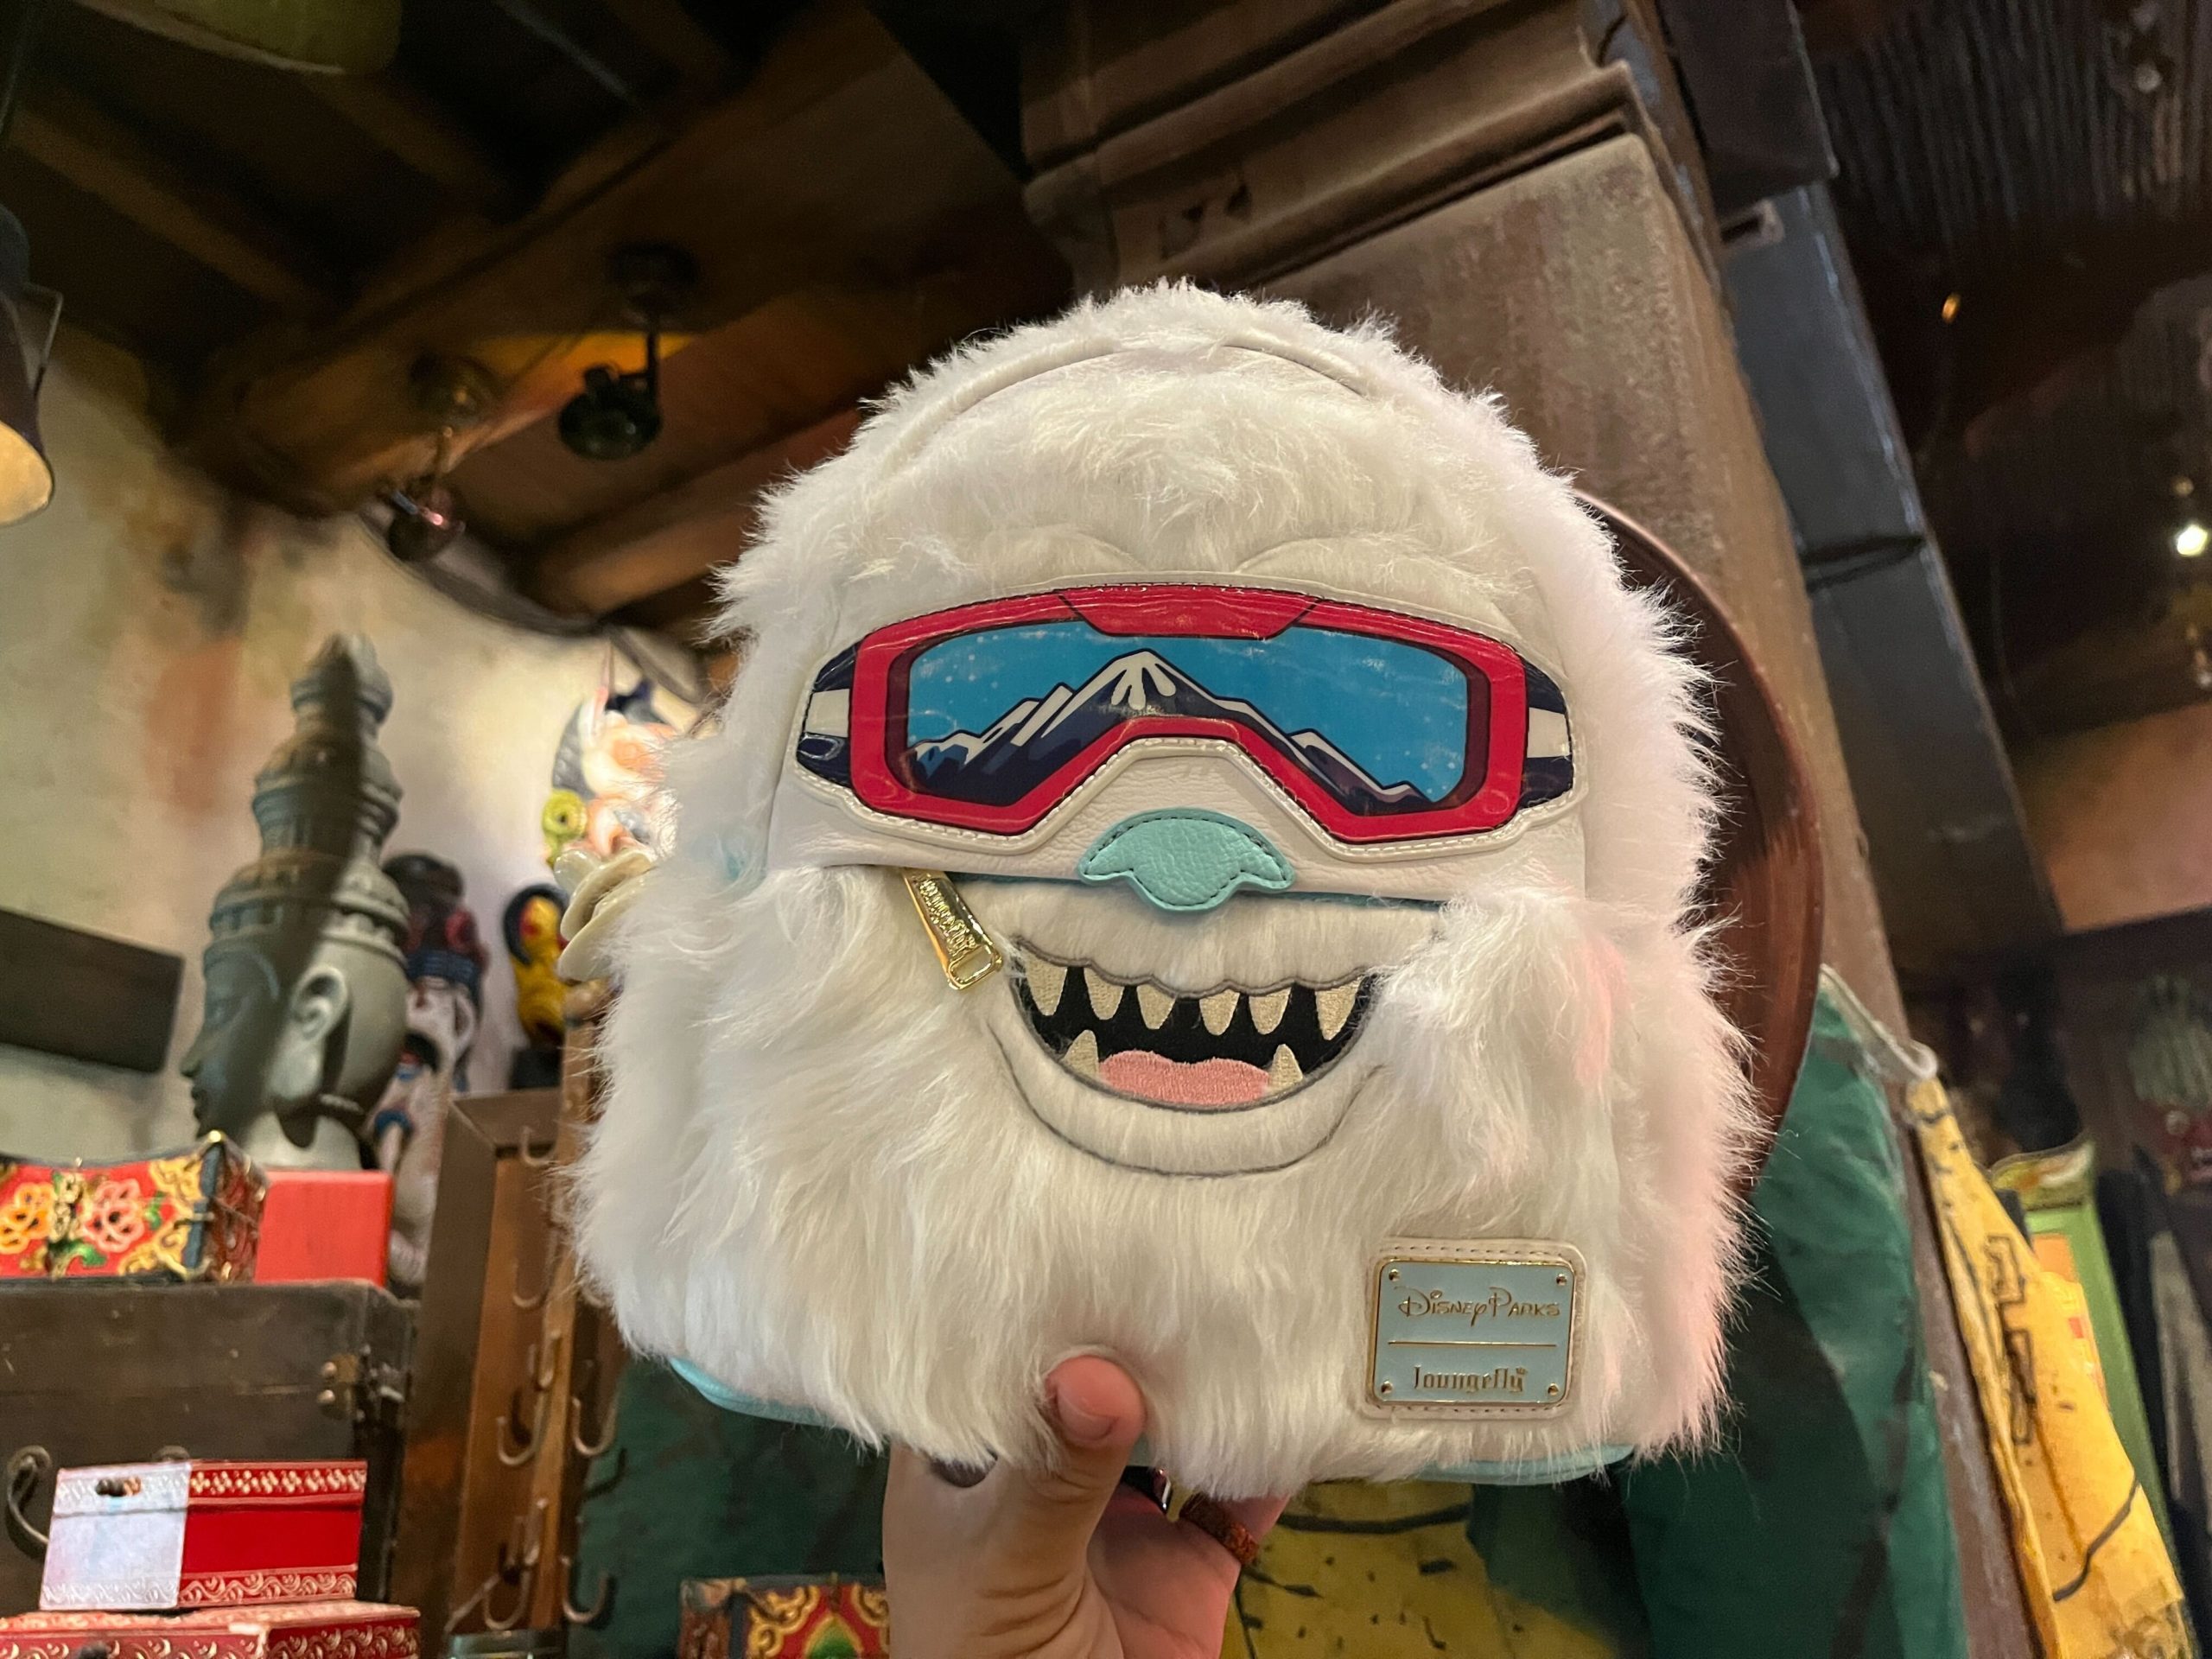 A Brand New Expedition Everest Yeti Loungefly Bag Has Arrived At Disney  World! 